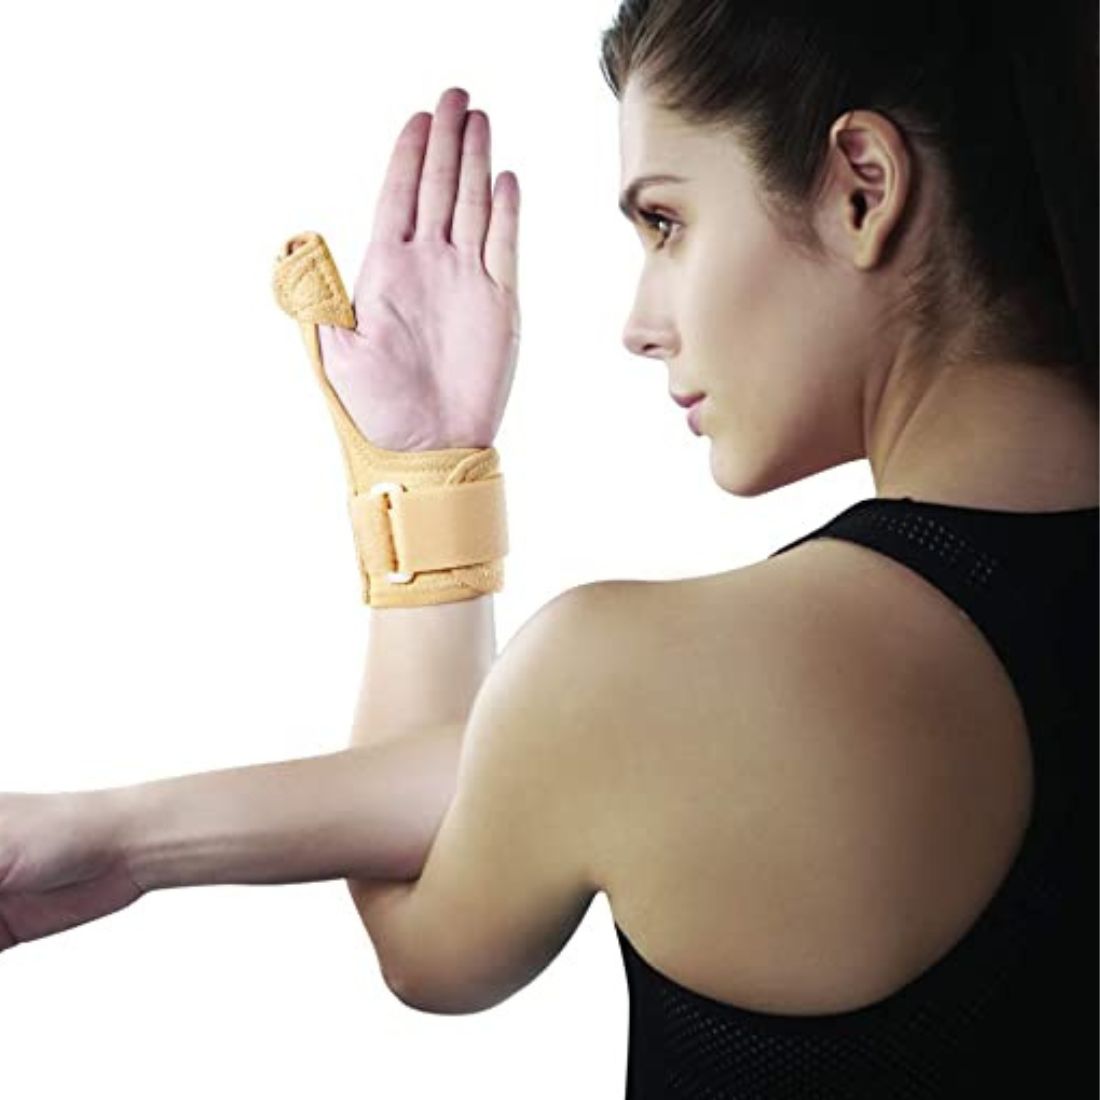 A thumb brace can help alleviate pain, increase stability, and take the stress off the joint